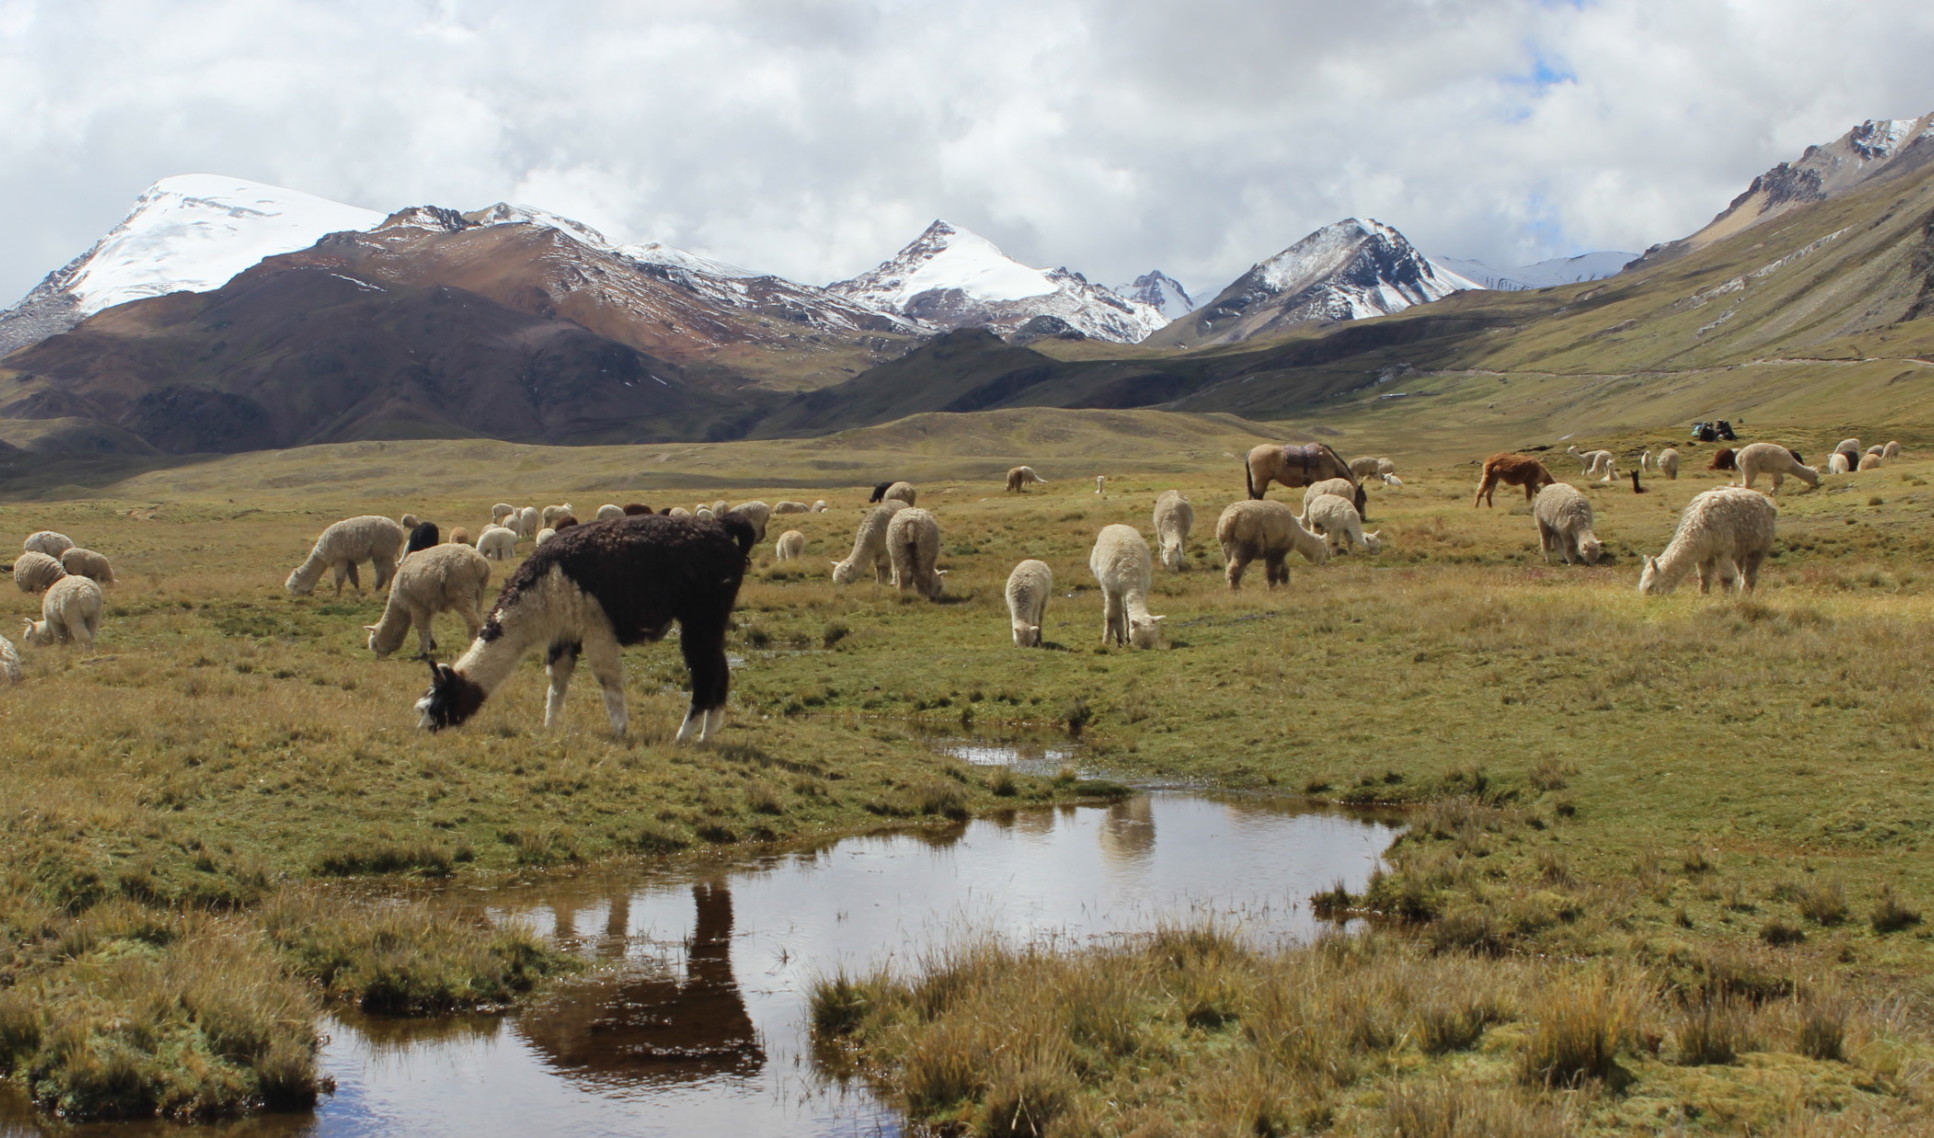 Photo showing mountain goats in foreground and snowy mountains in background